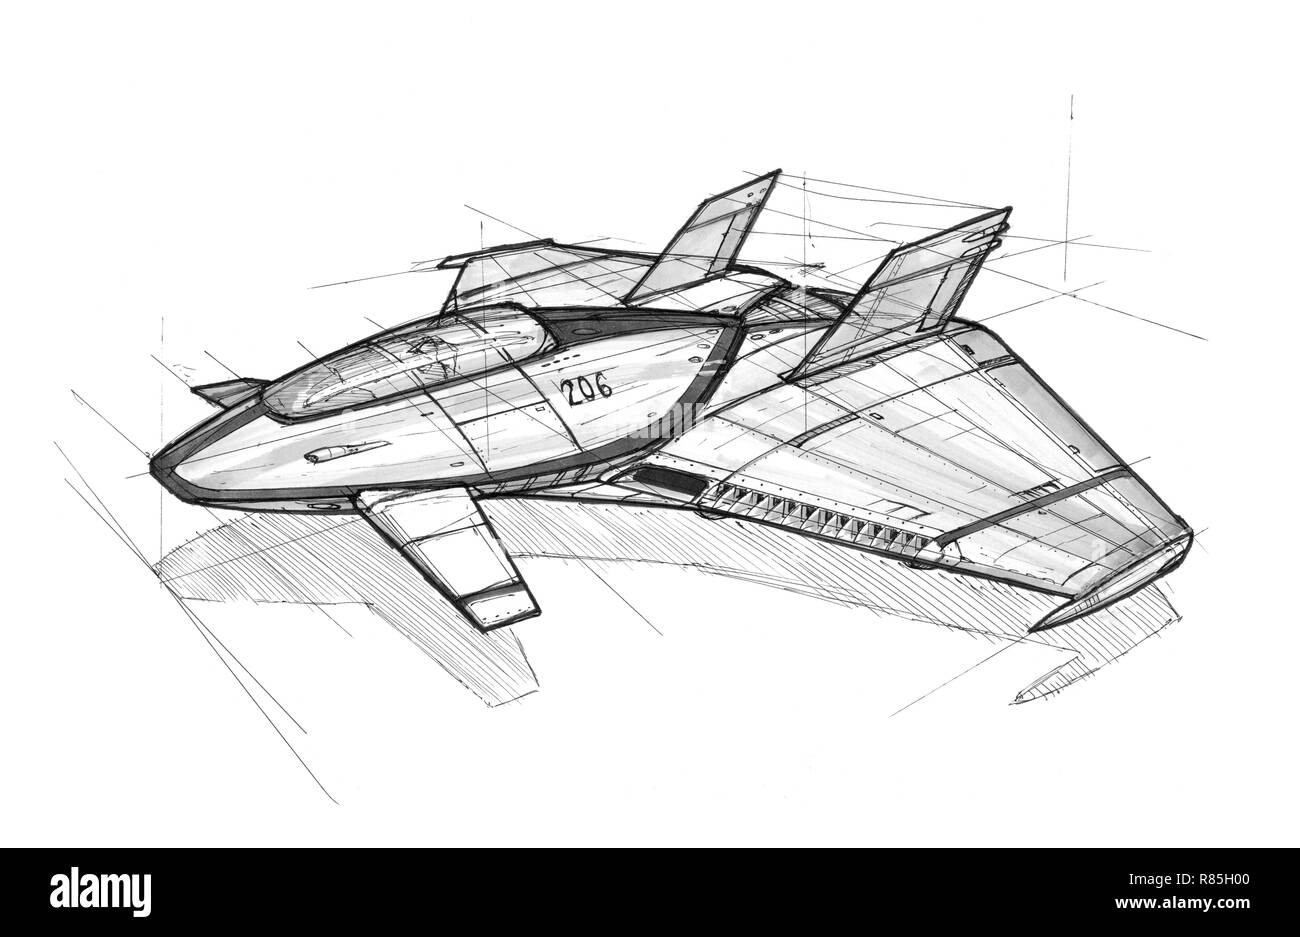 Ink Concept Art Drawing of Futuristic SpaceShip or Aircraft Stock Photo